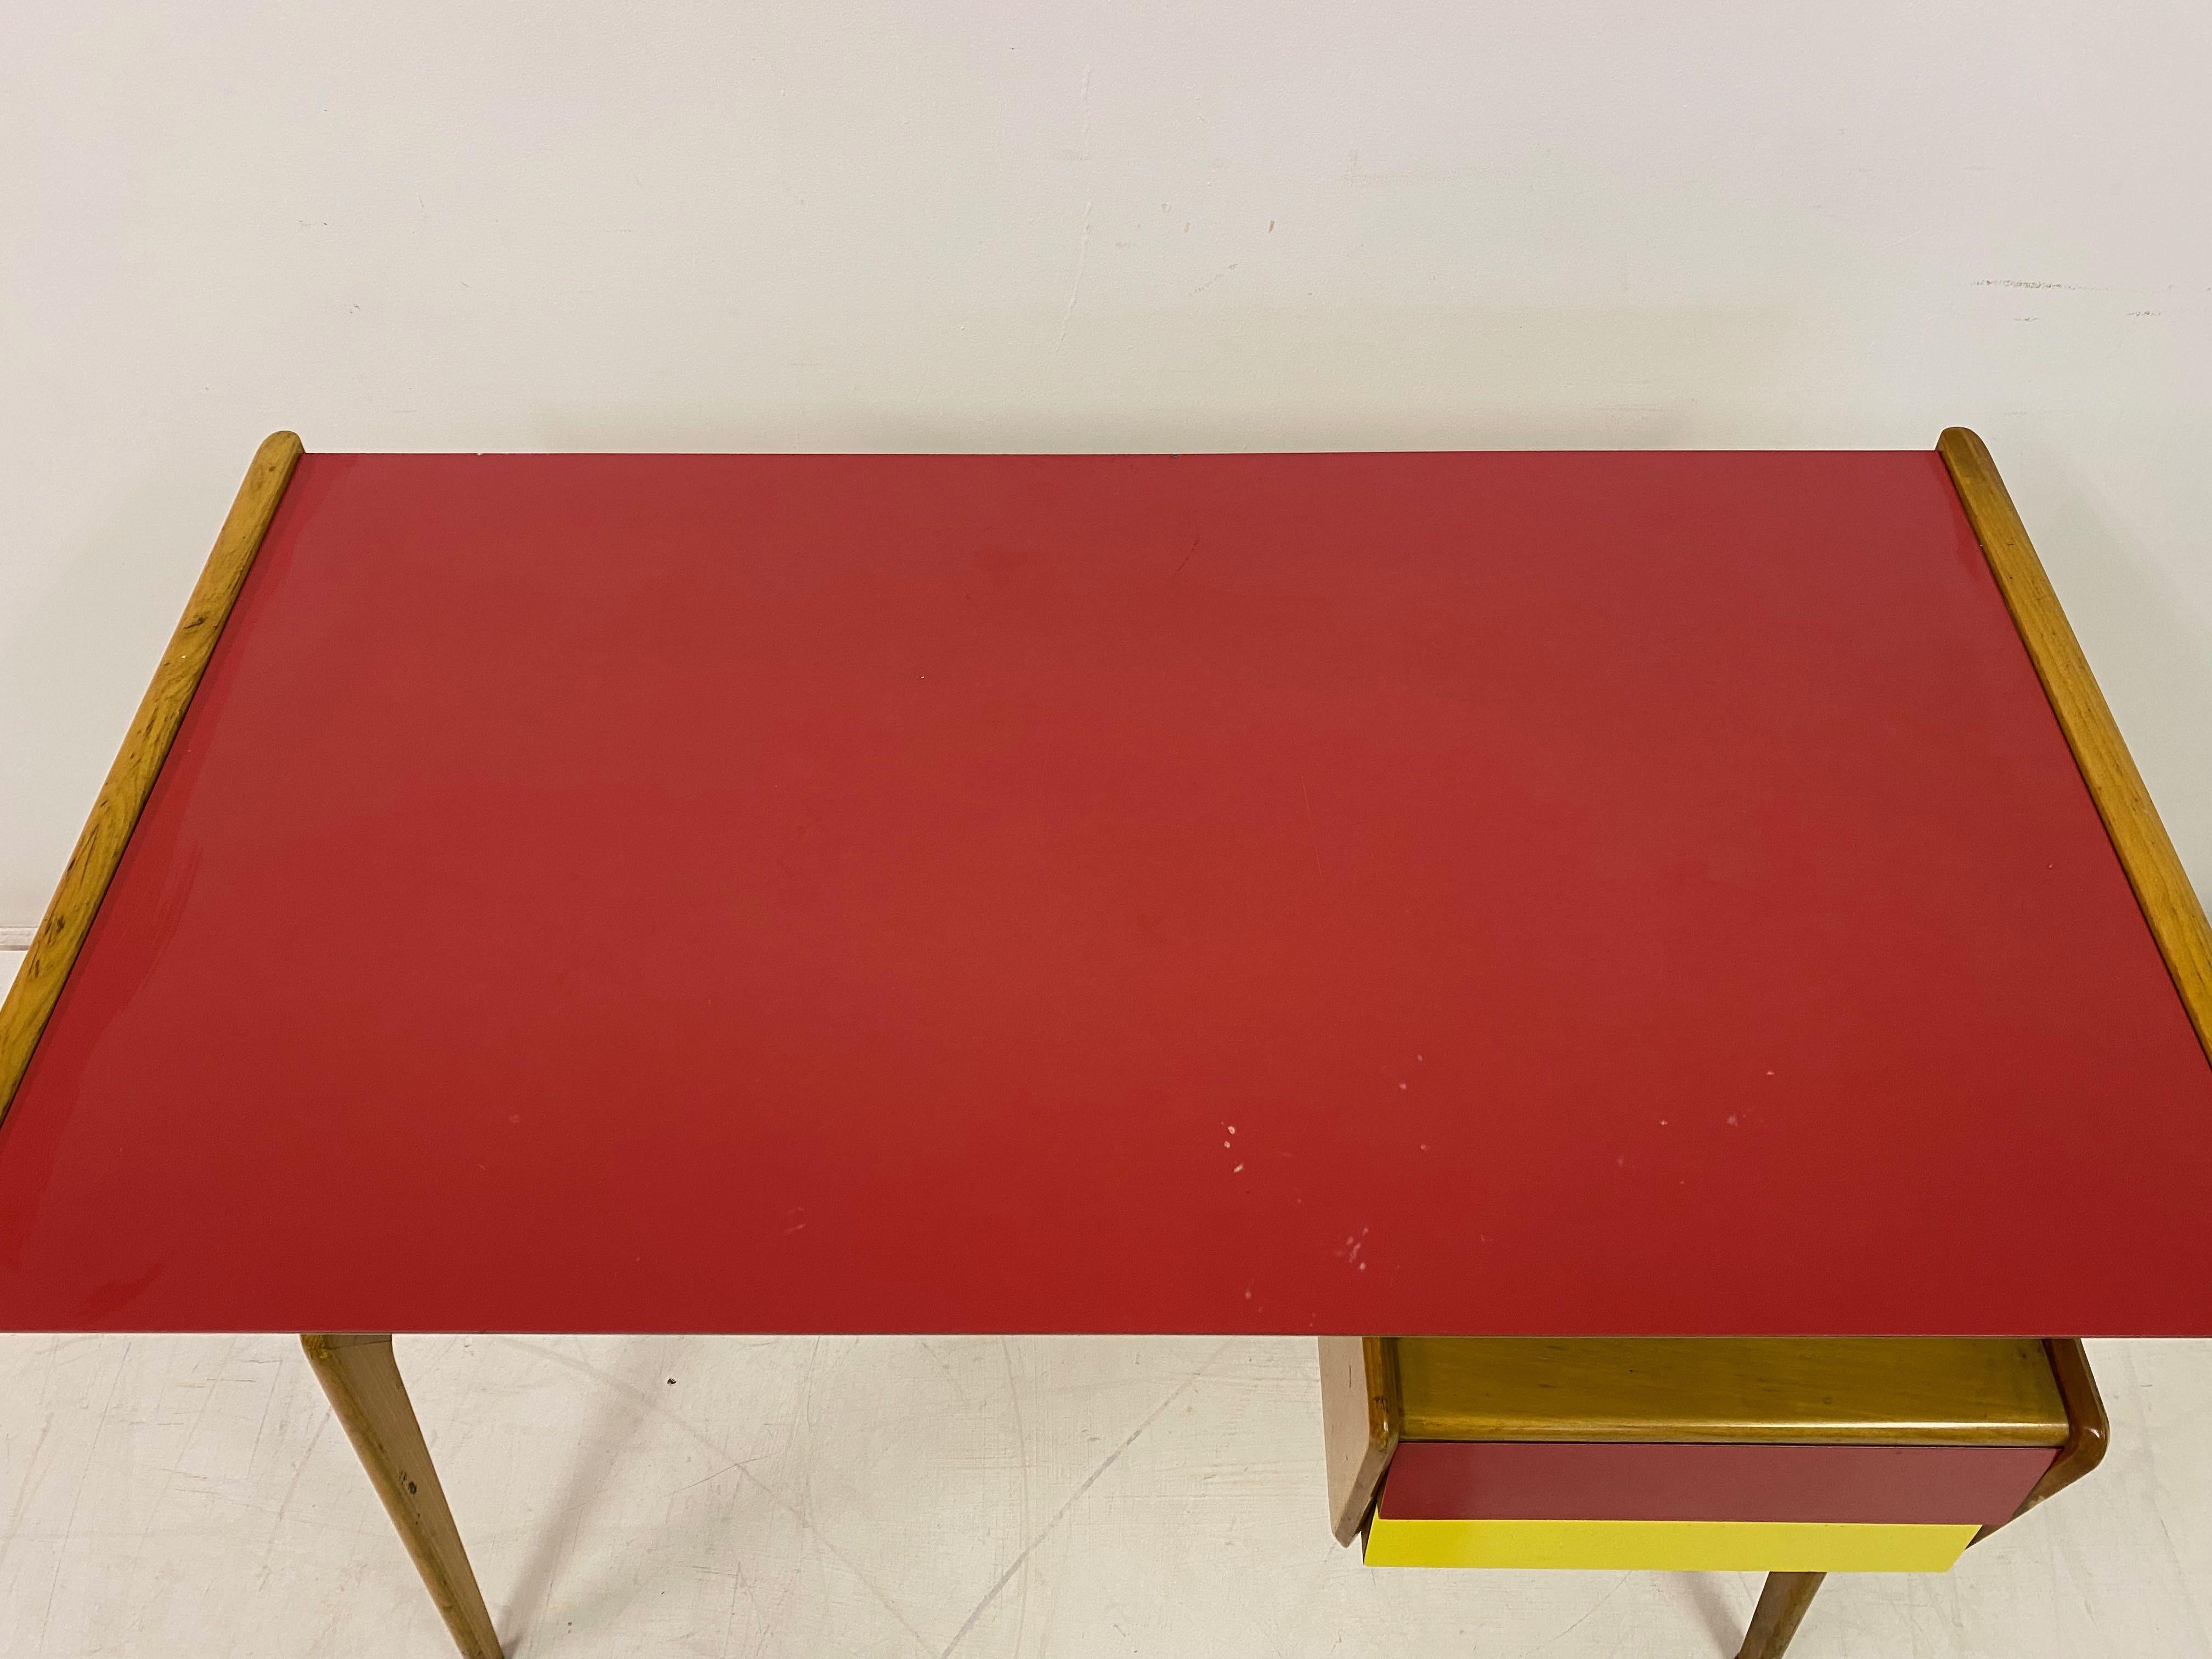 Small Vintage 1950s Italian Desk In Good Condition For Sale In London, London